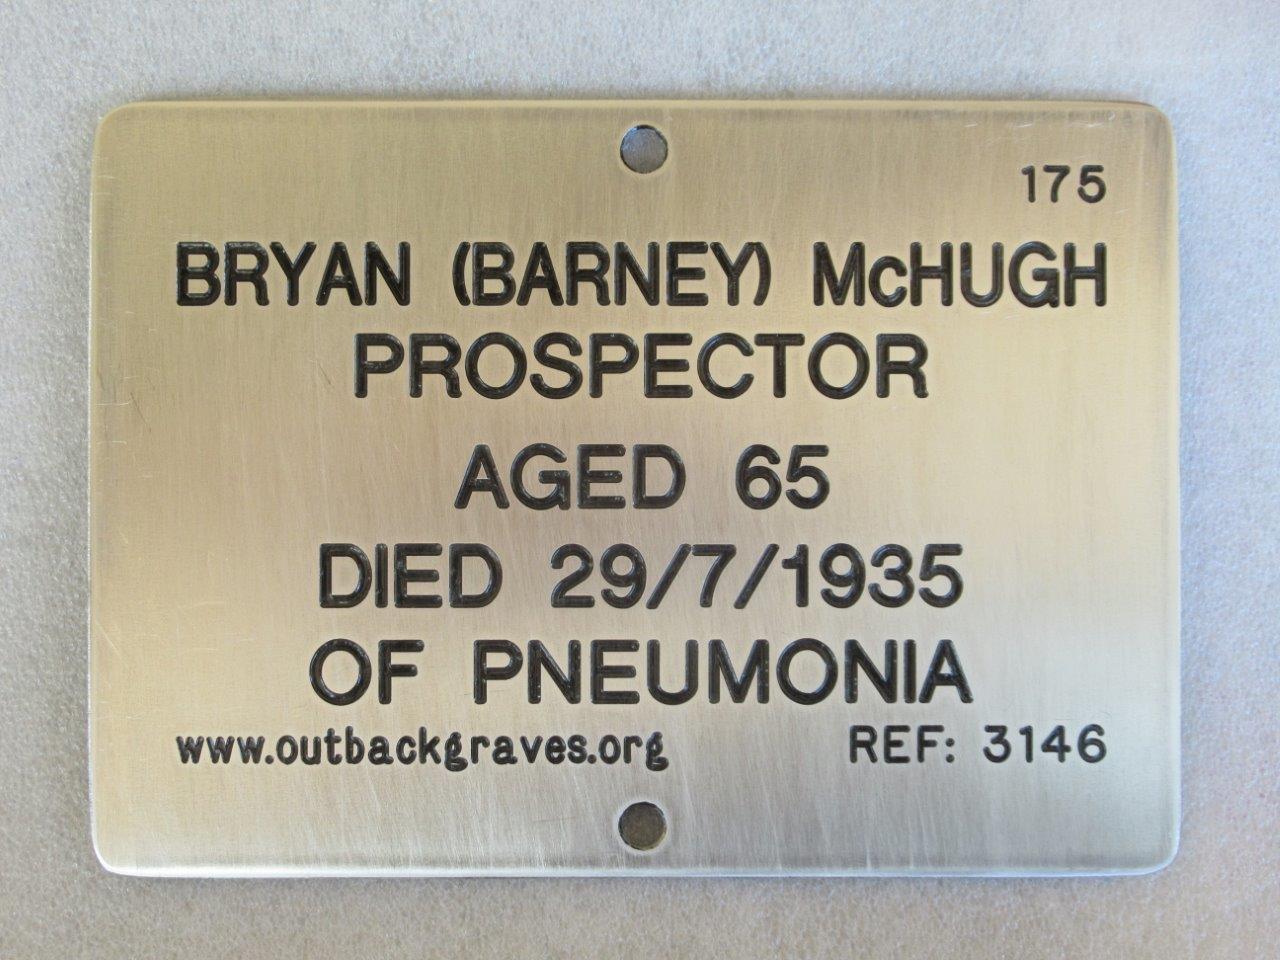 This is a photograph of plaque number 3146 for BRYAN (BARNEY) McHUGH at WILUNA